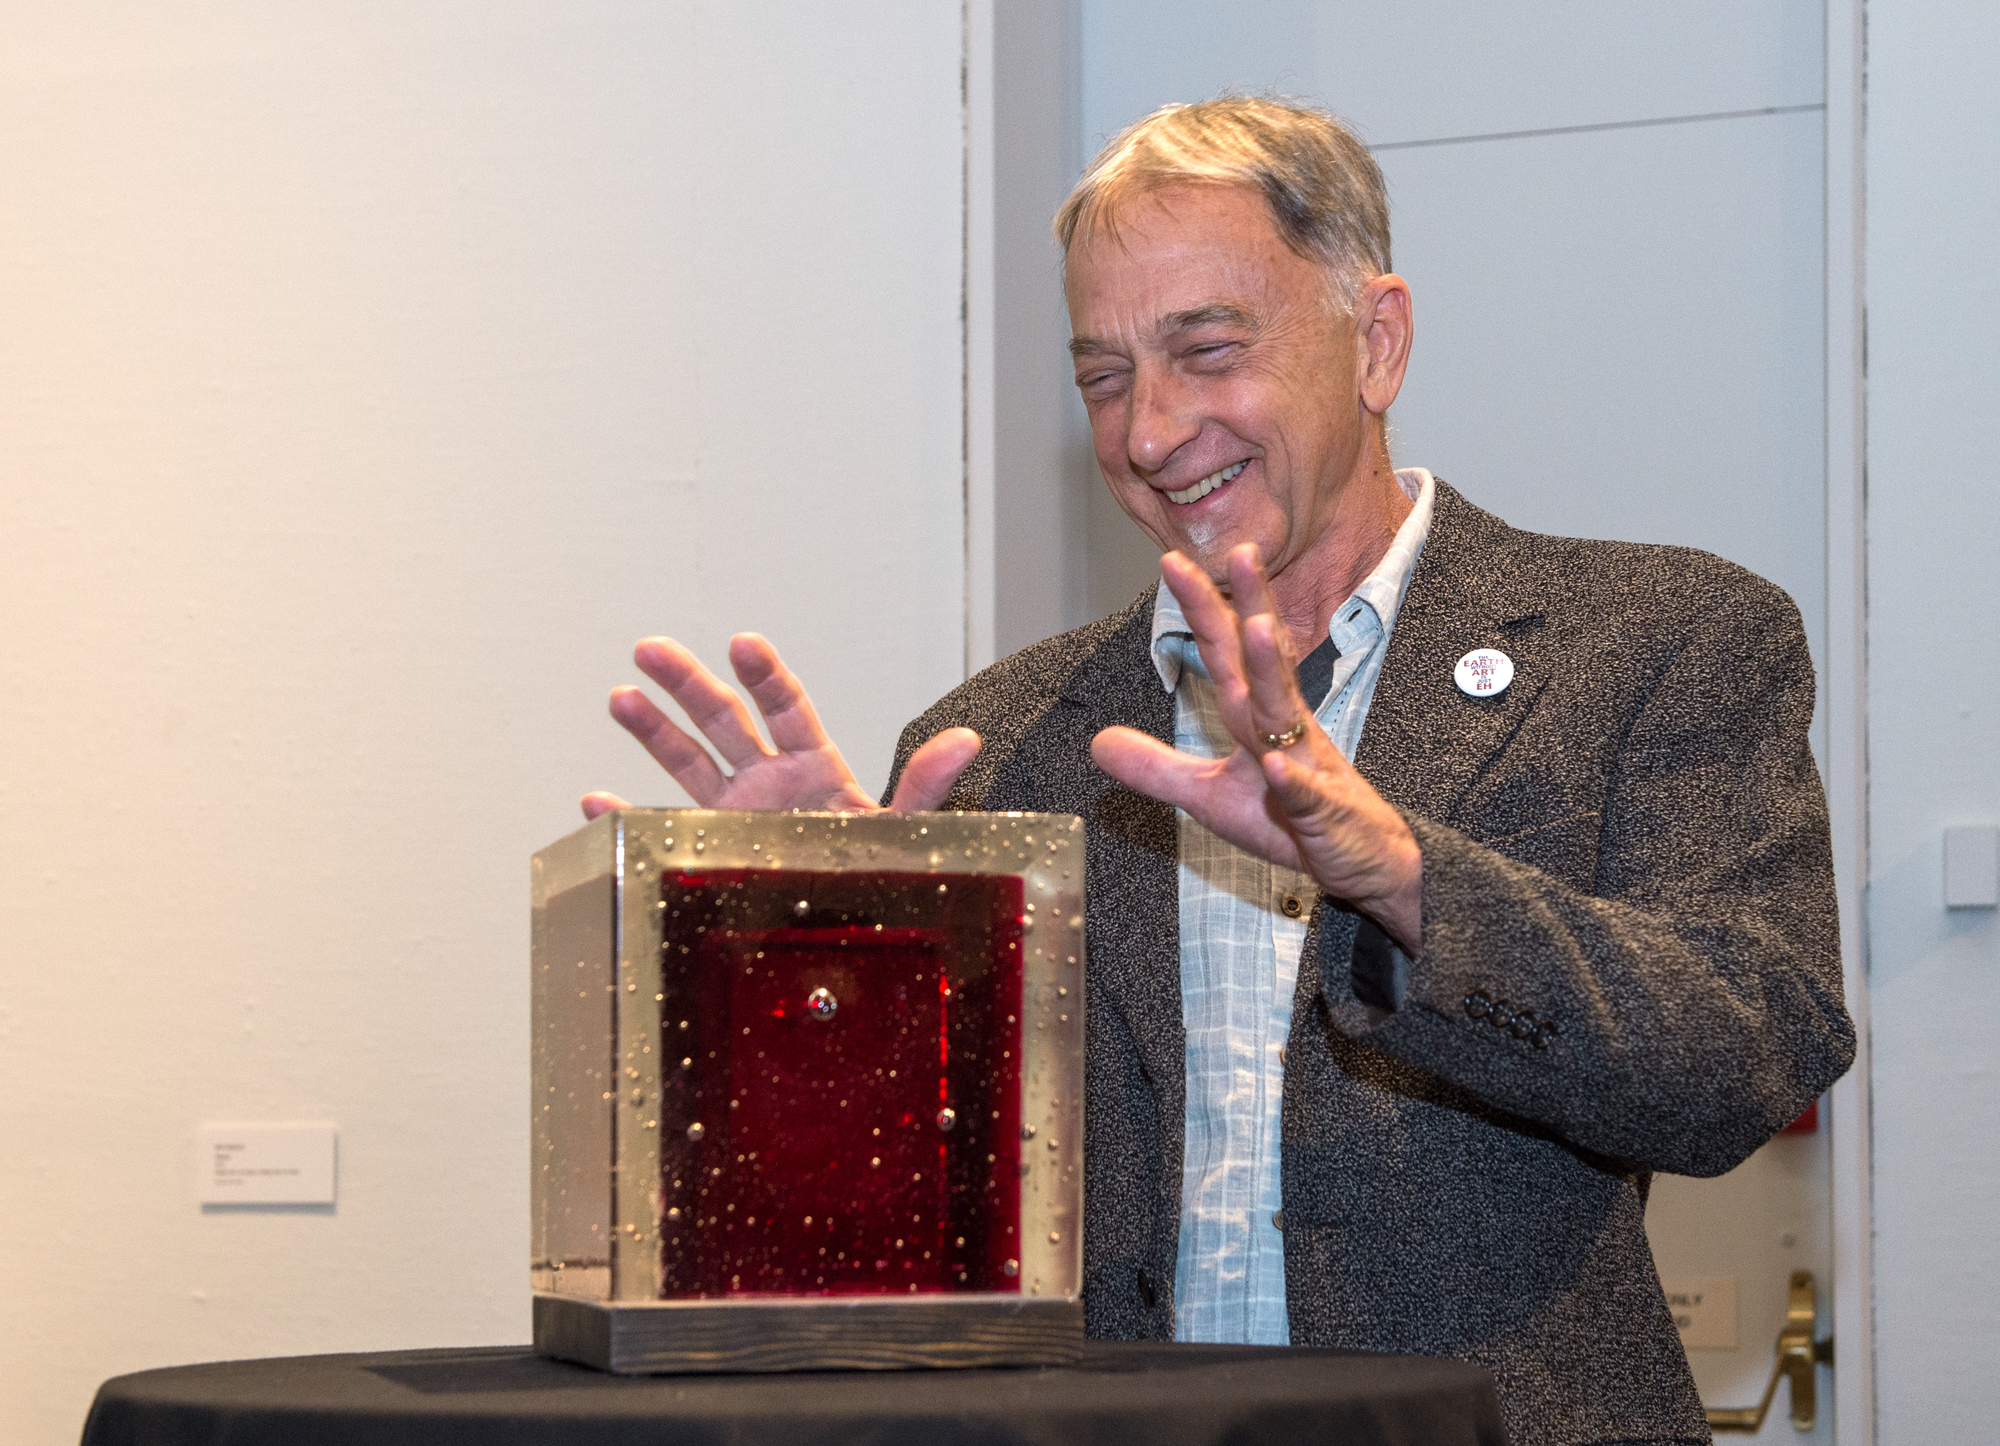 Chris Bruce, Director, Museum of Art/WSU receives a farewell thank-you gift from Olson Kundig and museum staff 